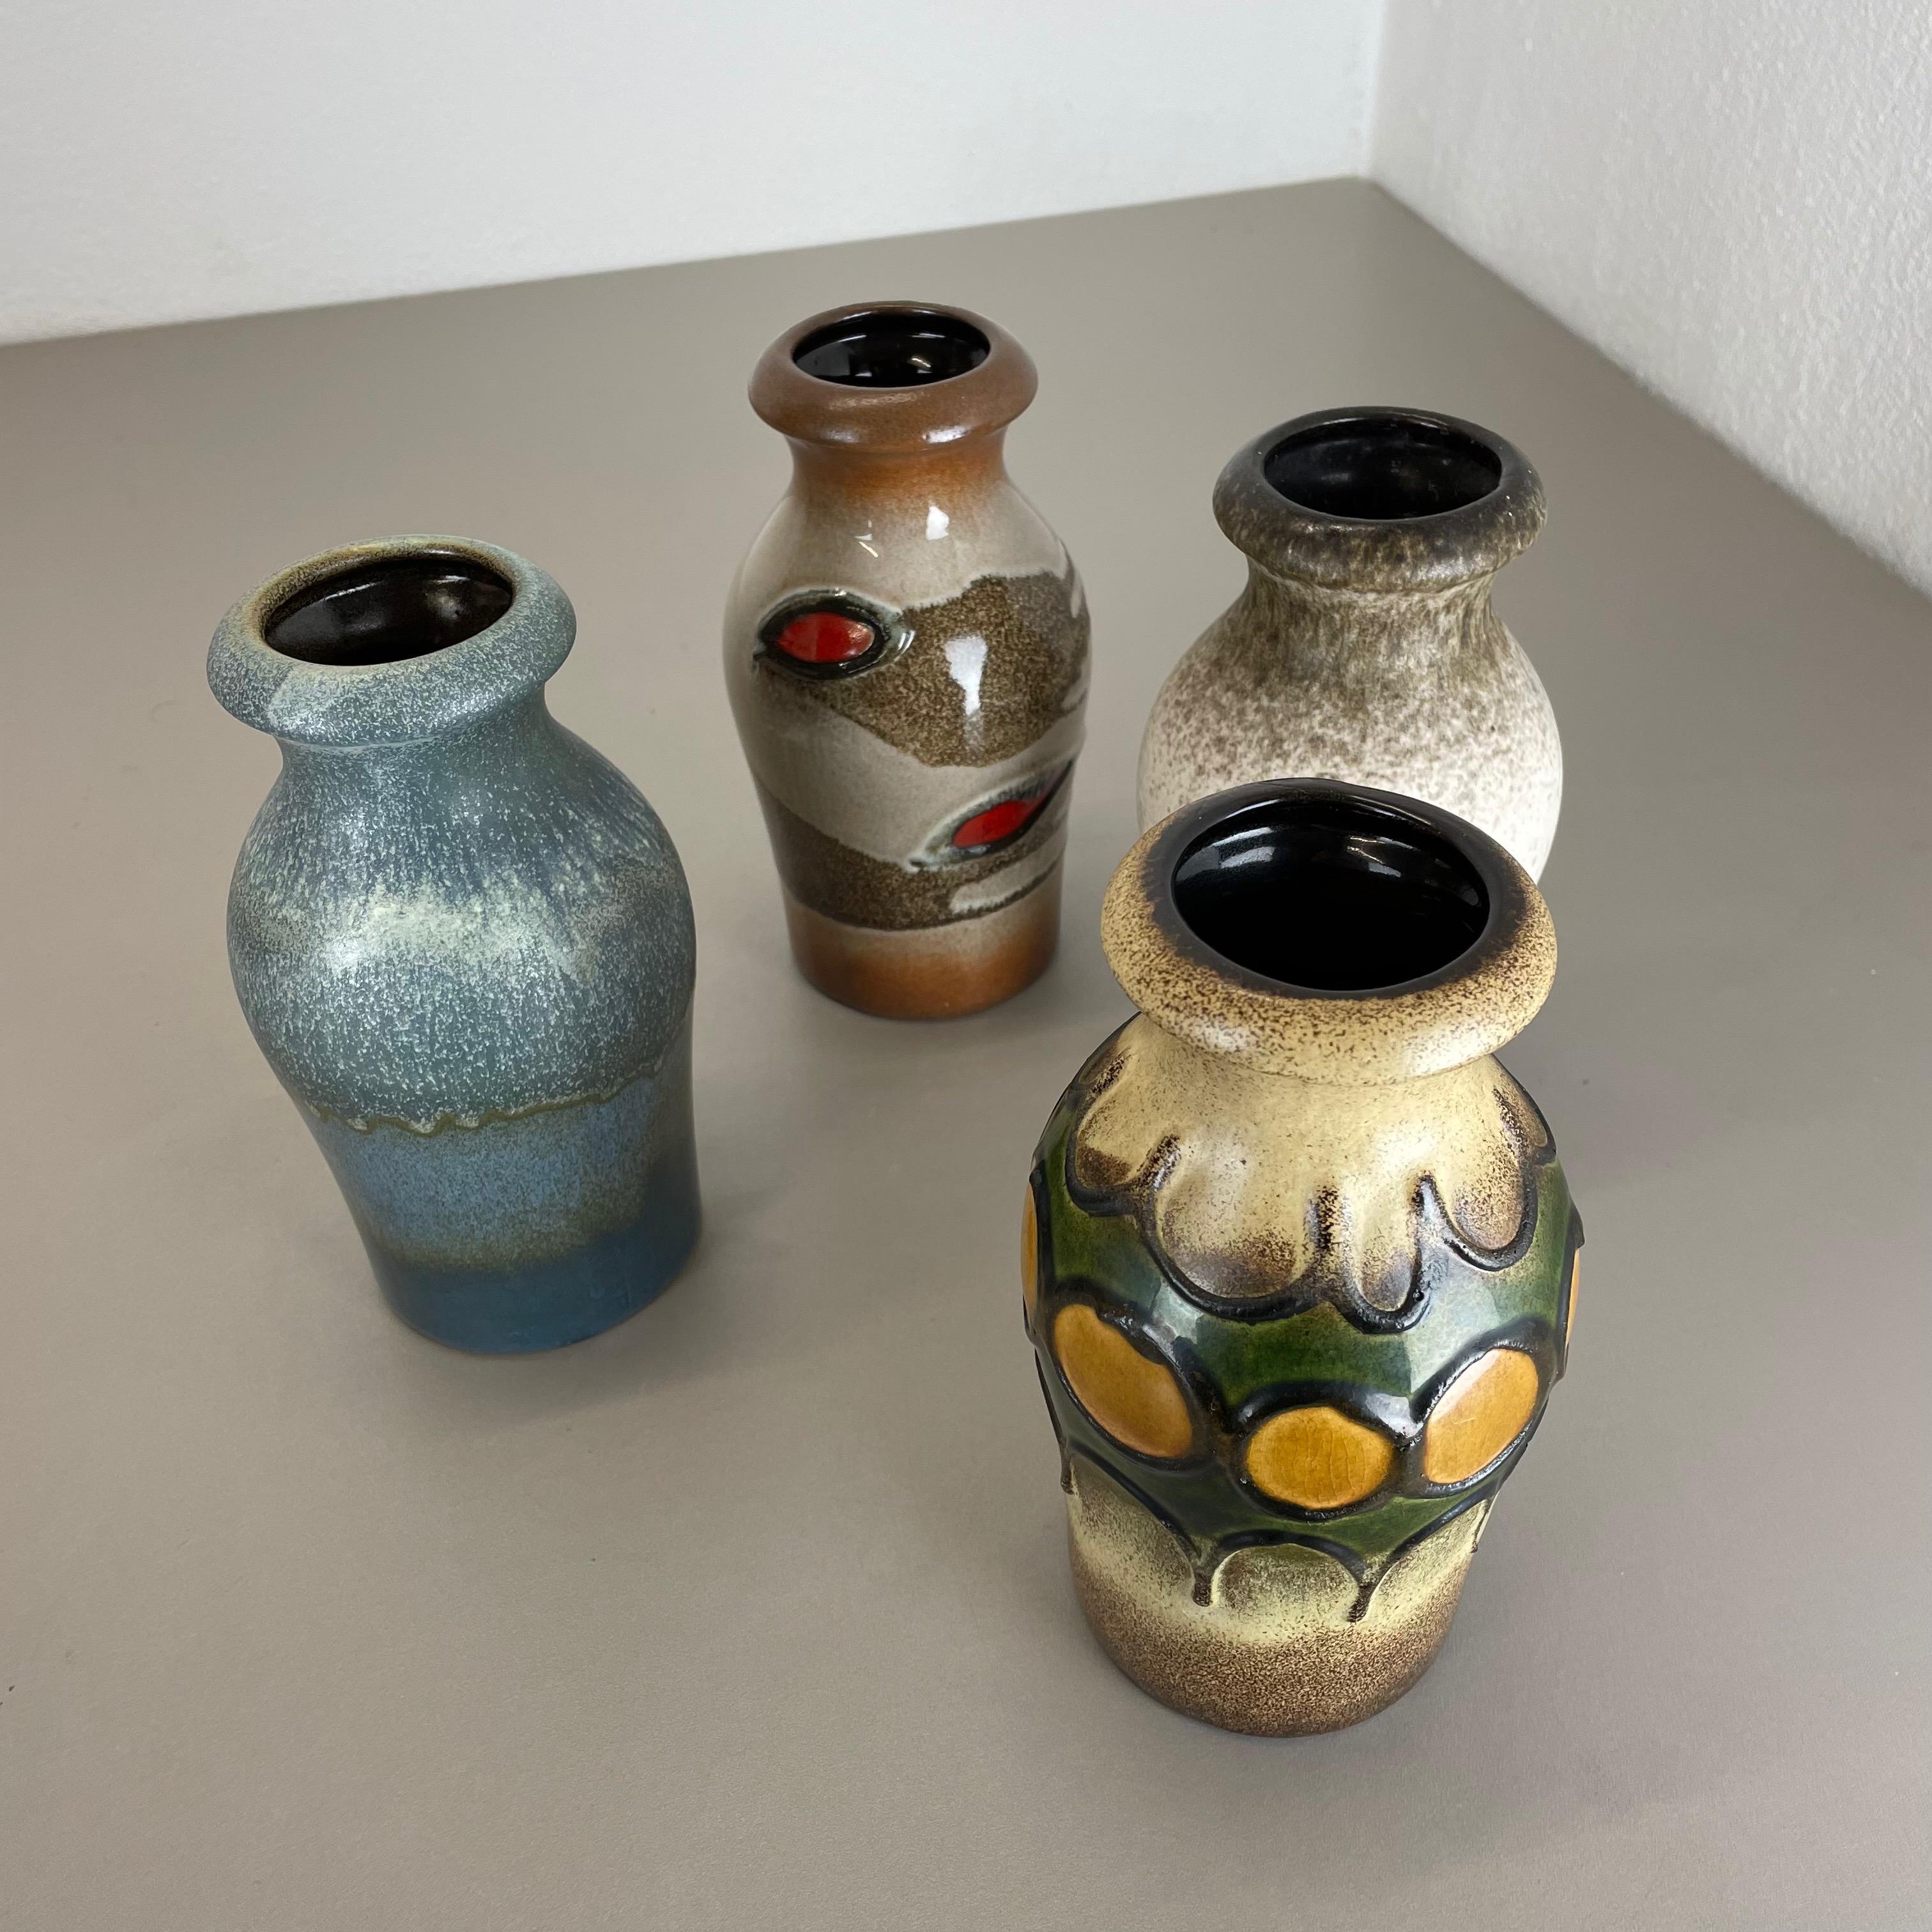 Set of Four Vintage Pottery Fat Lava Vases Made by Scheurich, Germany, 1970s For Sale 10